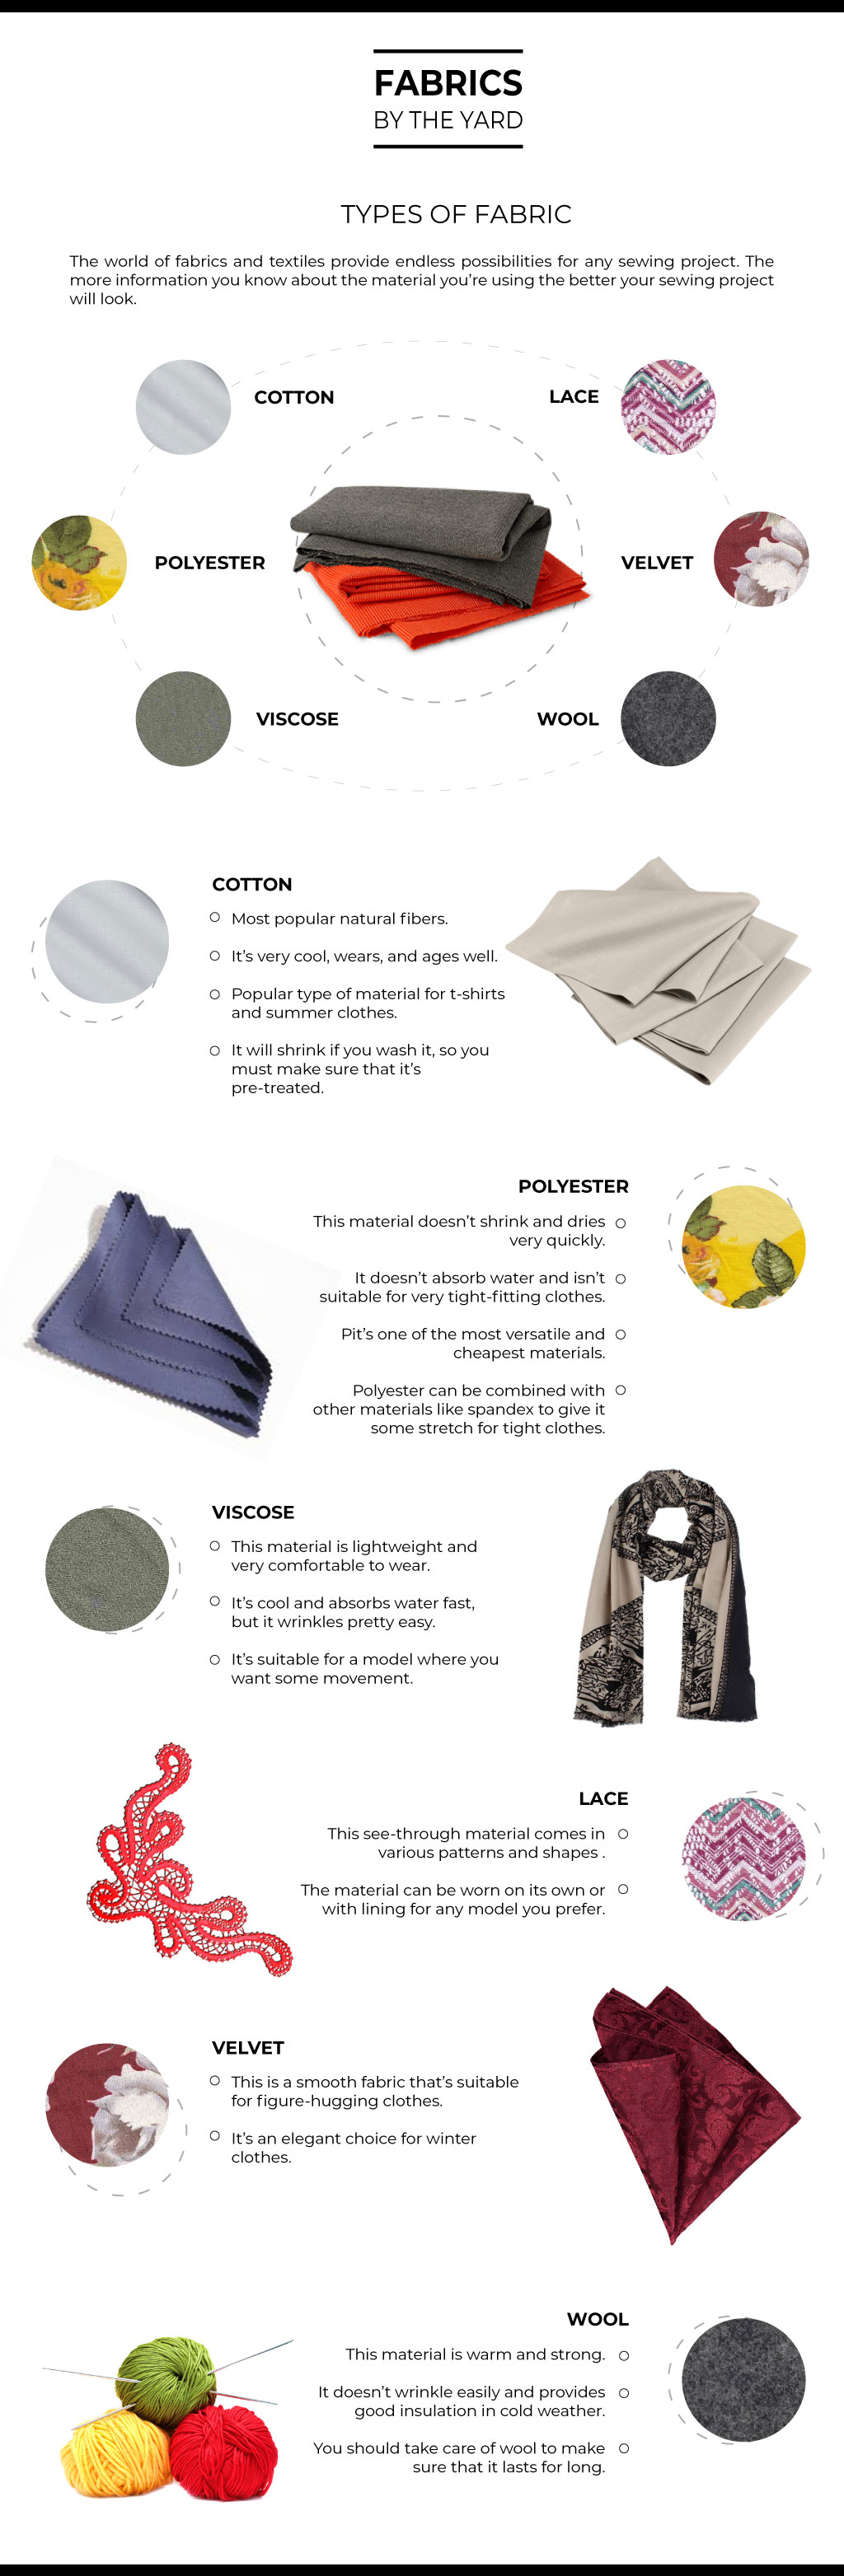 Lining Fabric Guide: Application, Types, Properties and Selecting Tips